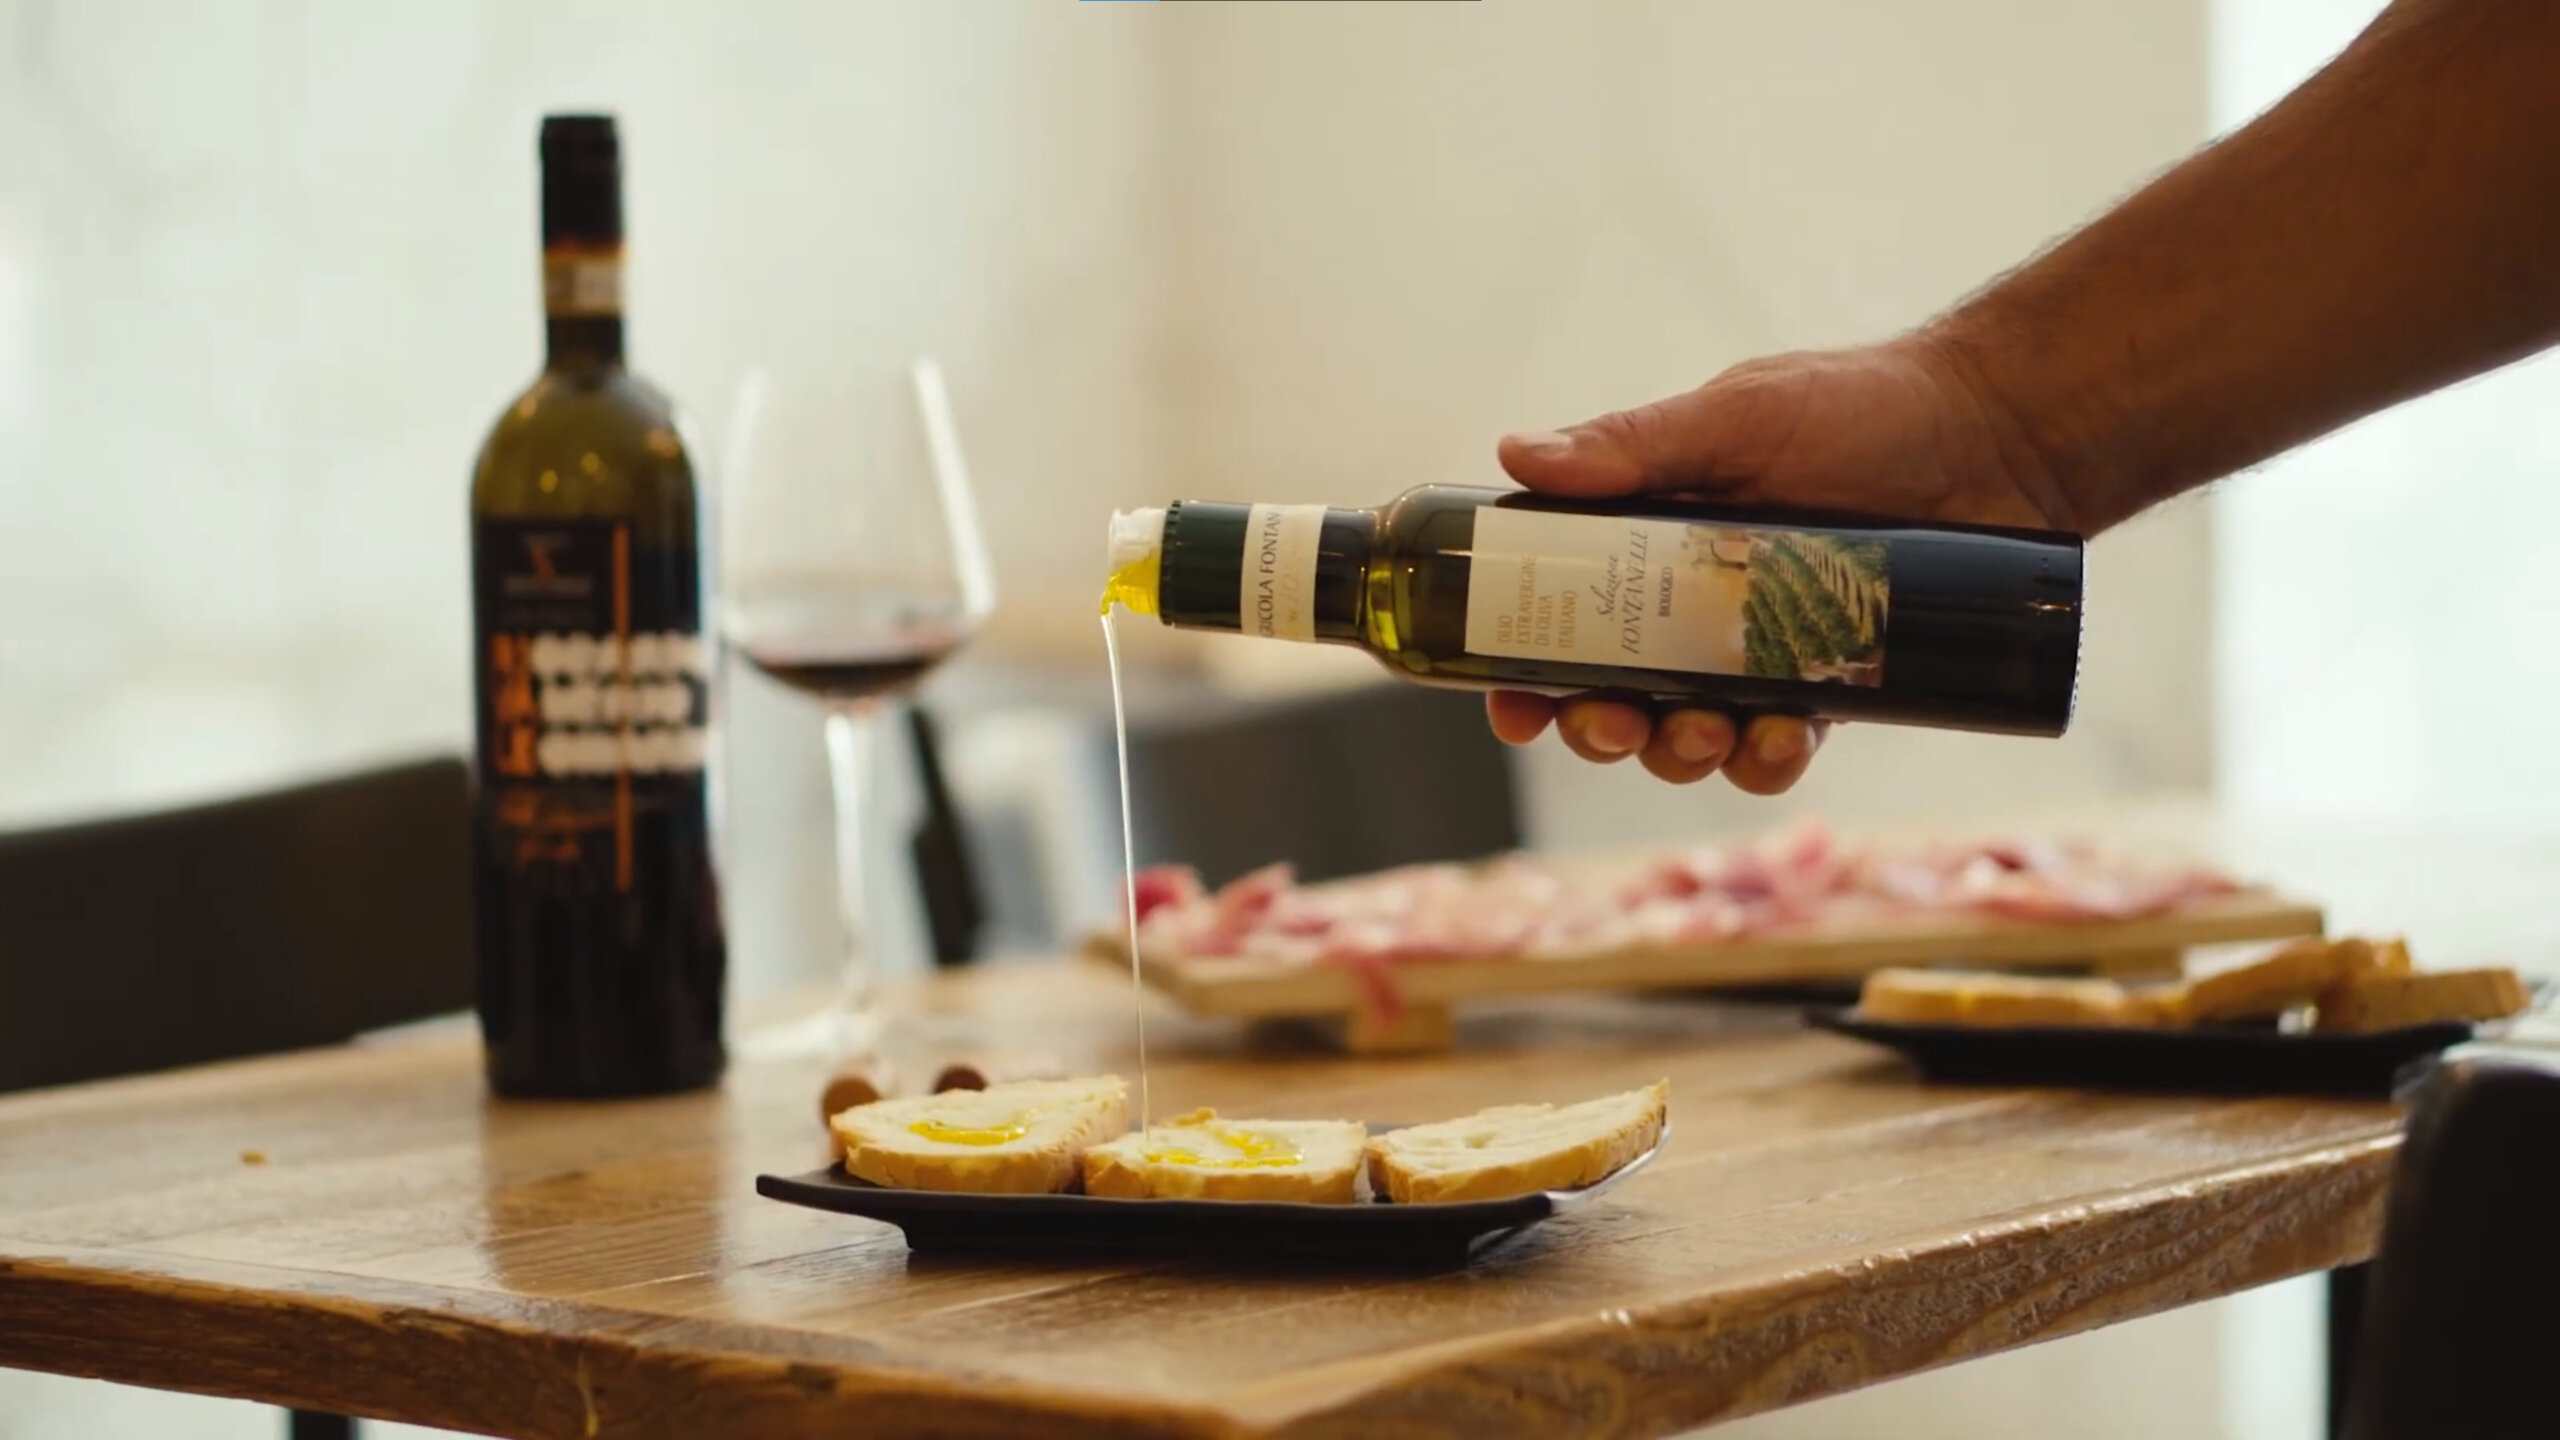 Olive oil being poured onto toasted bread with a bottle and glass of wine in the background